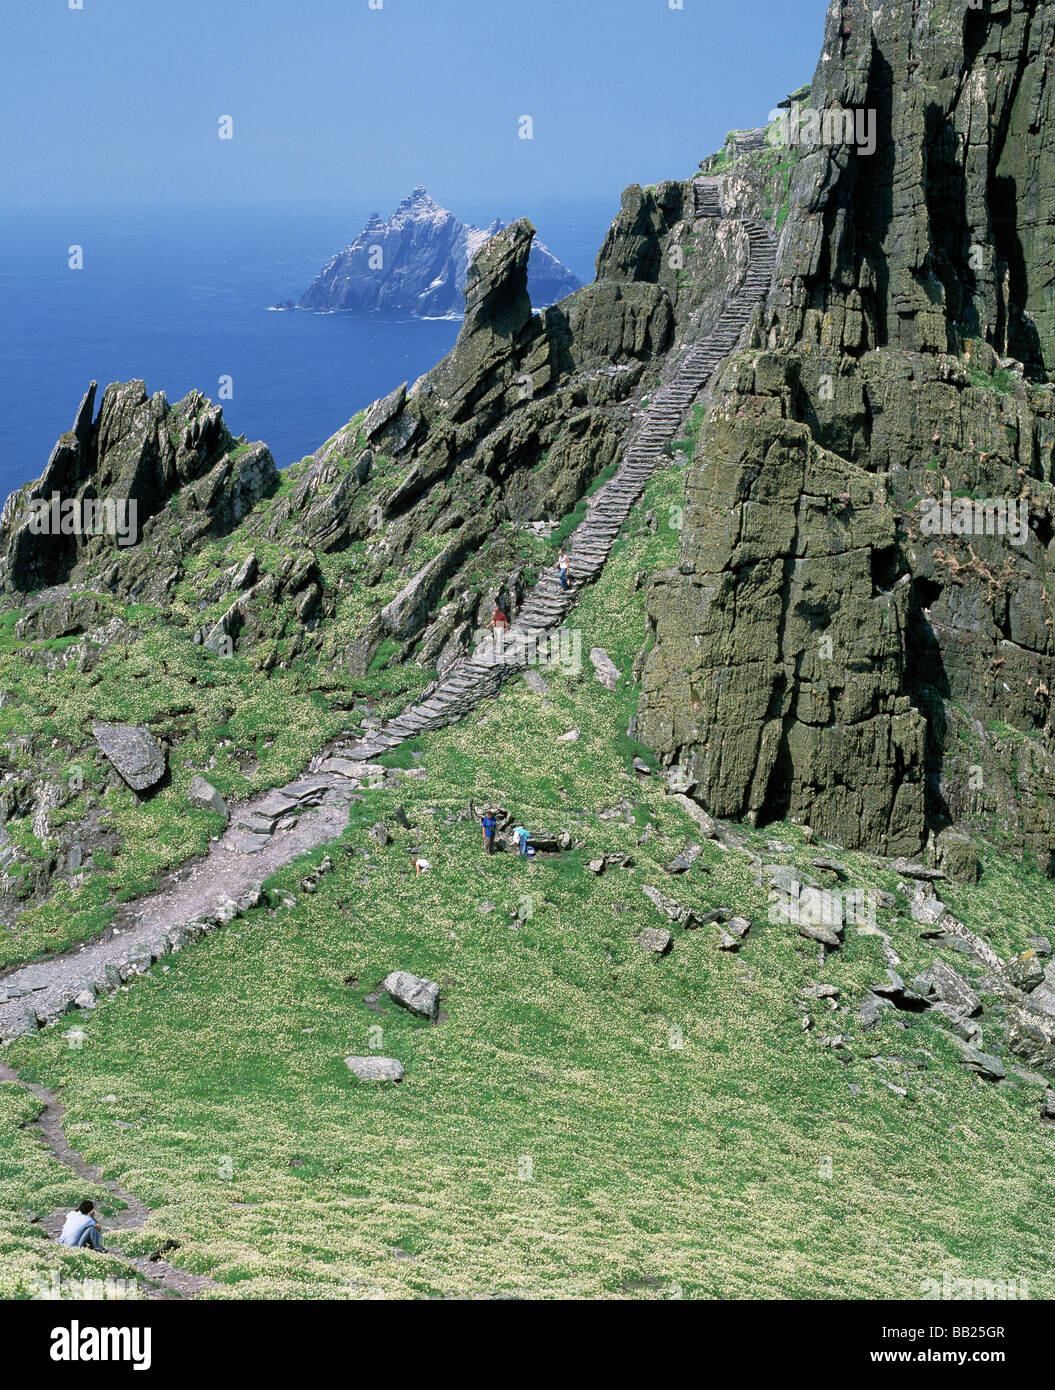 ireland, co county kerry, iveragh peninsula skellig michael  monastic relics, and sea bird colony, beauty in nature, Stock Photo